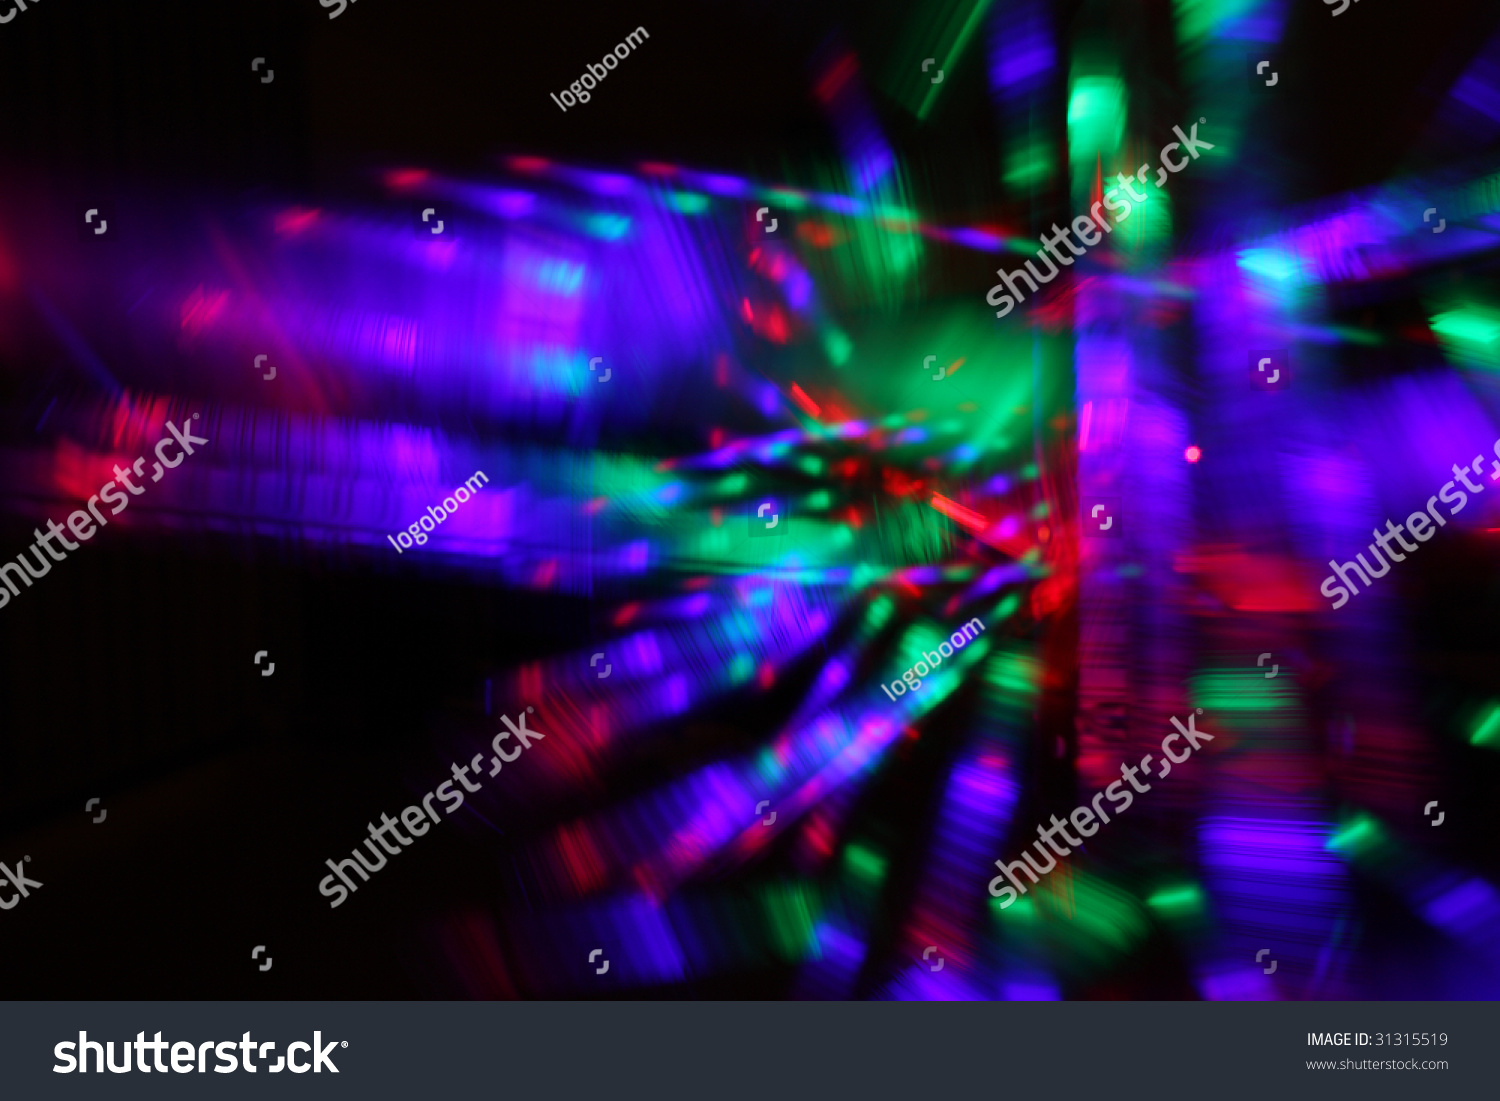 PowerPoint Template: 80s disco - abstract background of moving colorful ...